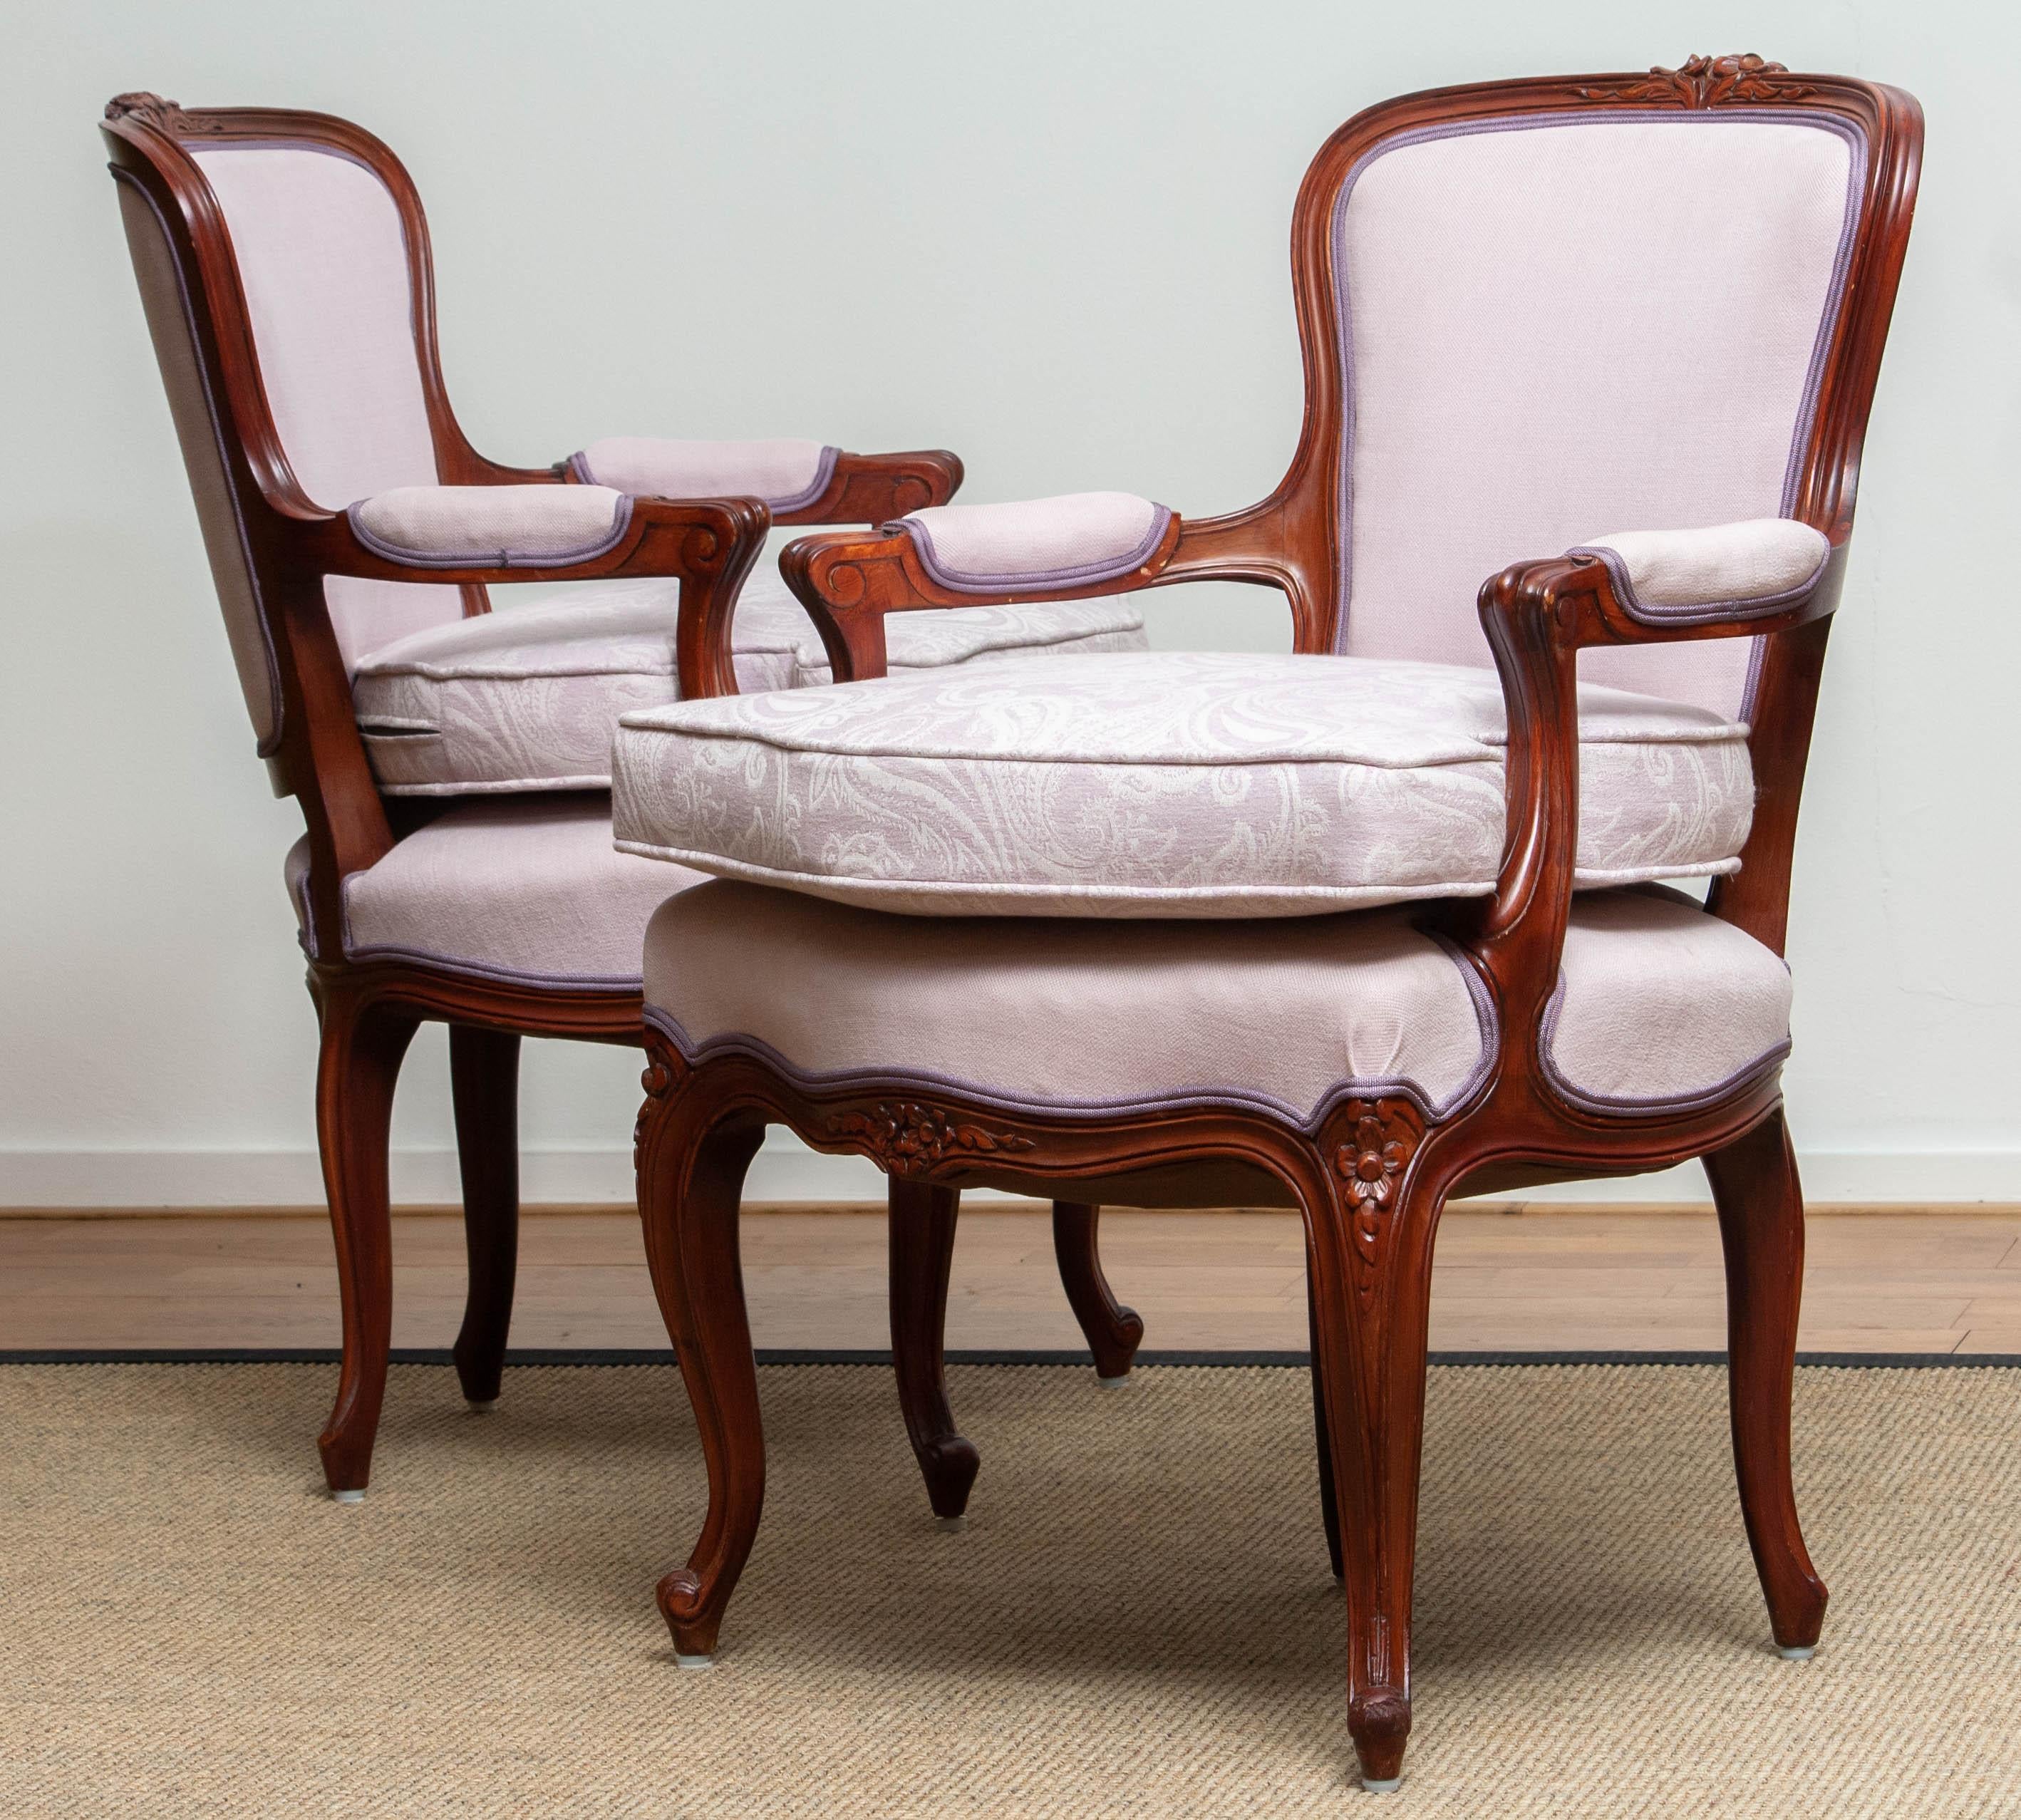 1950s Pair of Pink Swedish Rococo Bergères in the Shabby Chic Technique Chairs F 7